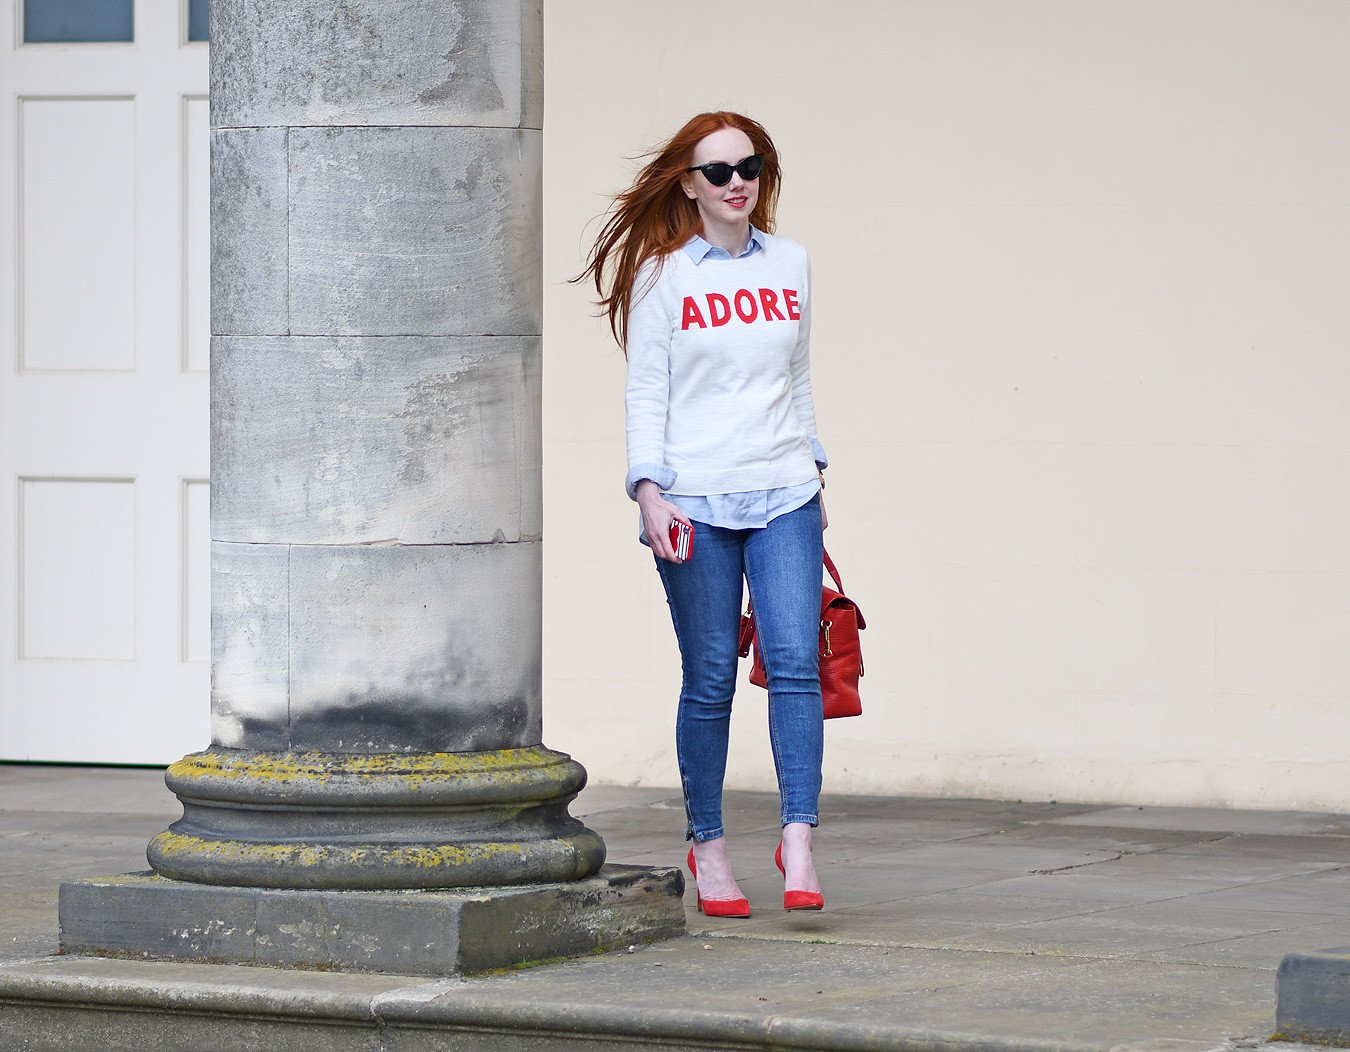 jeans, slogan sweater and high heels